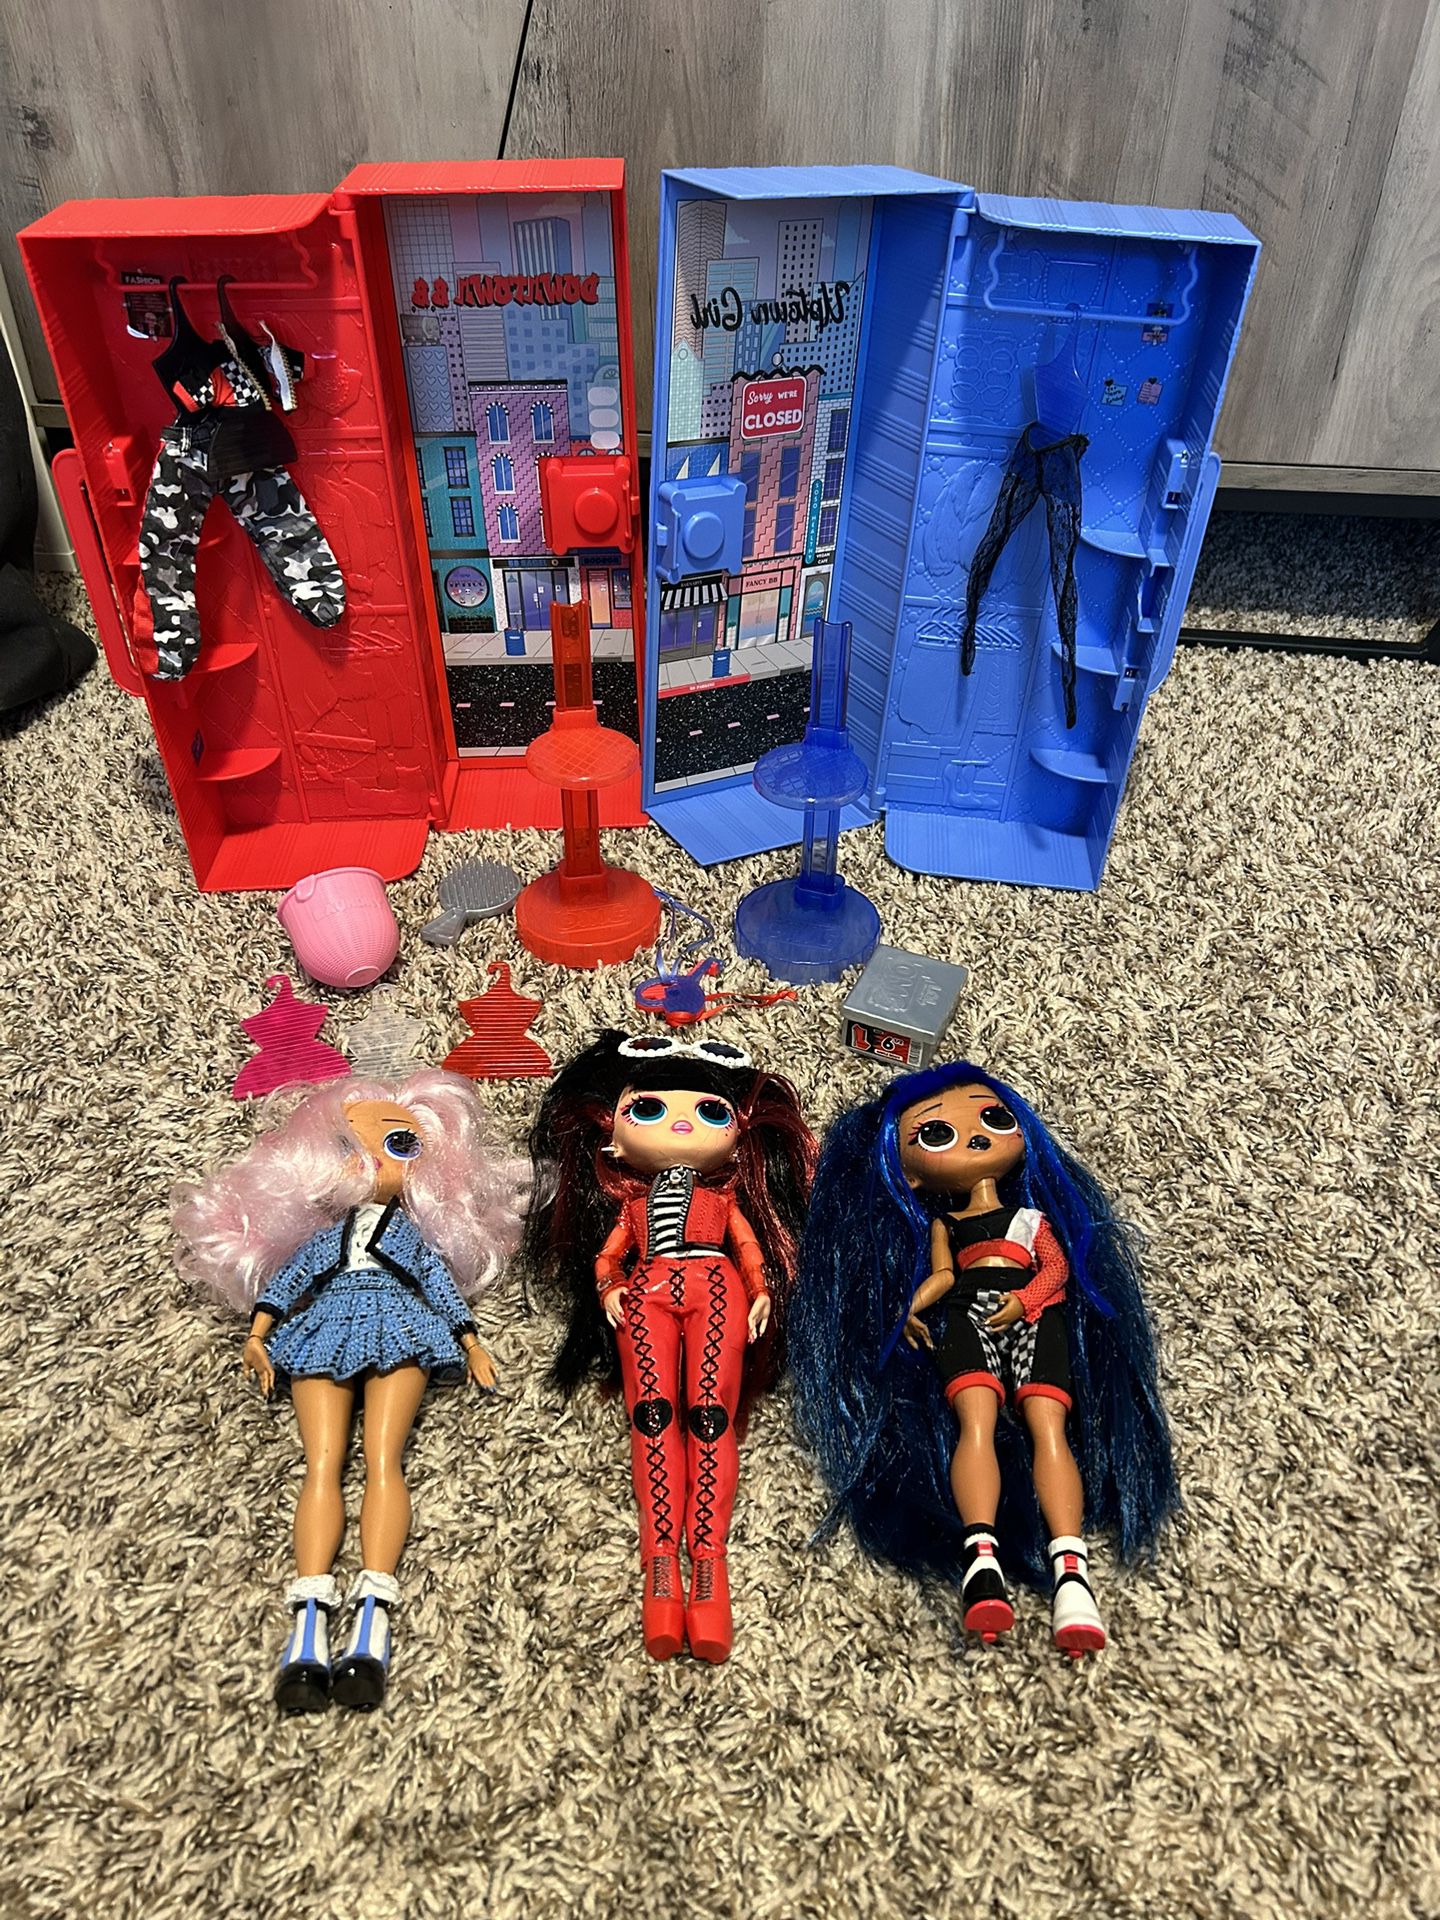 LOL Surprise OMG Dolls Uptown Downtown Red & Blue Lockers with KEYS